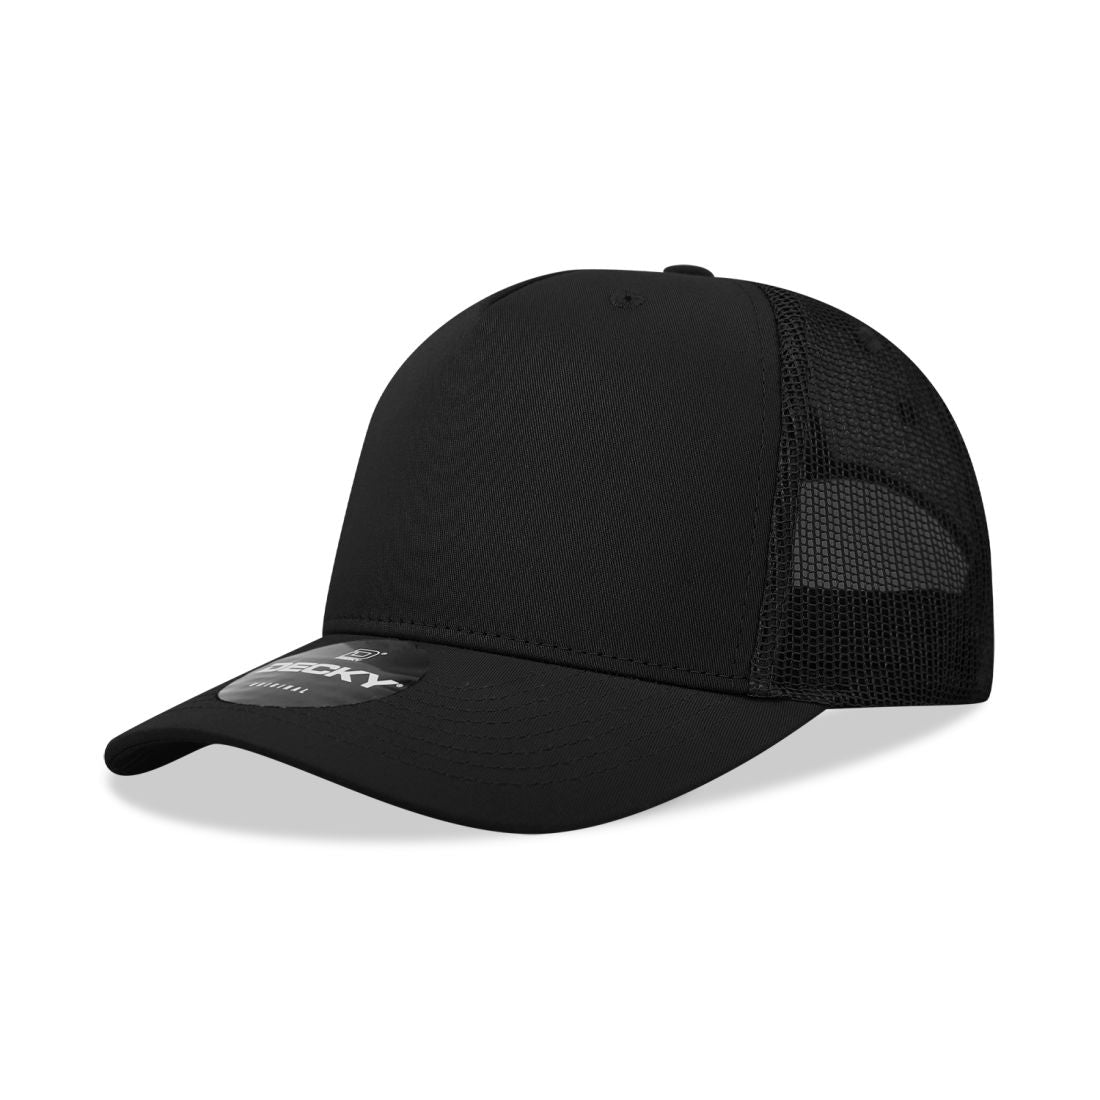 Trucker Caps Hats Panel Structured 5 Decky Cotton 6030 Mid Profile